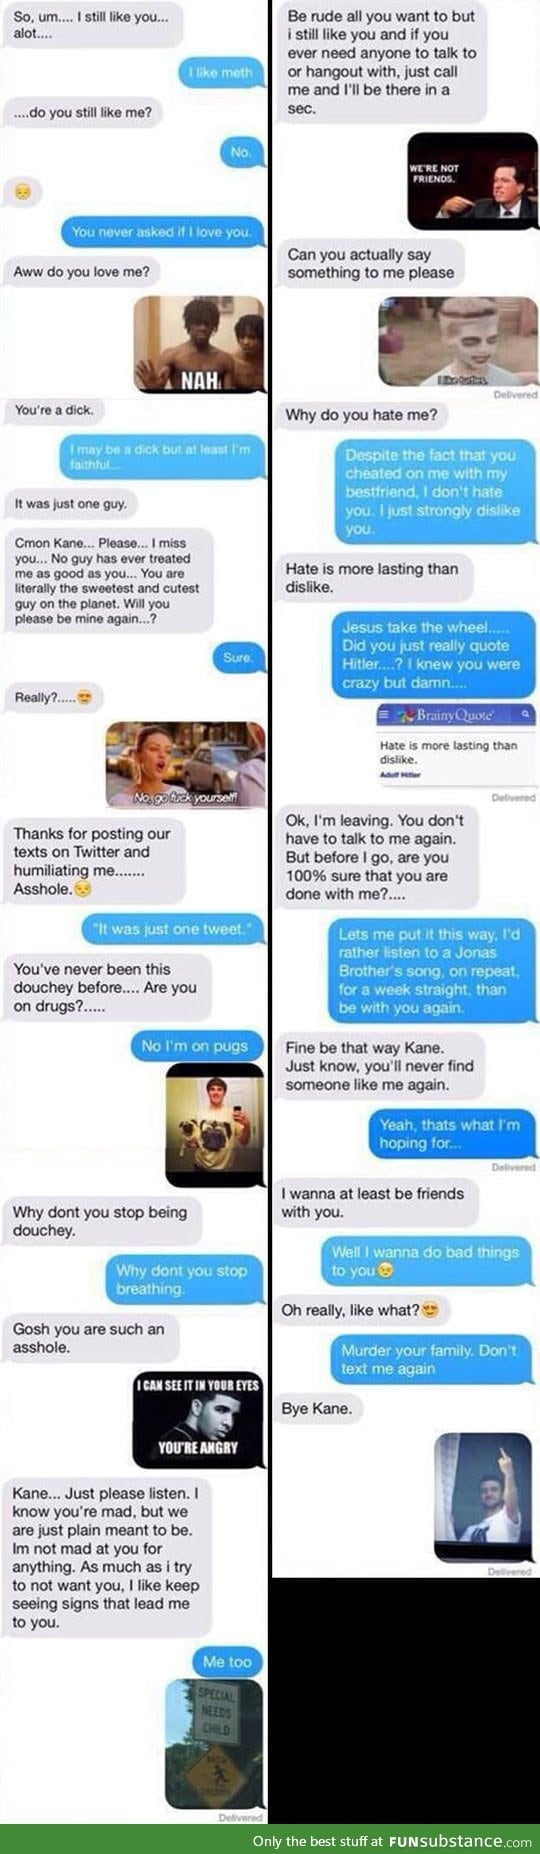 Trolling your ex at its finest